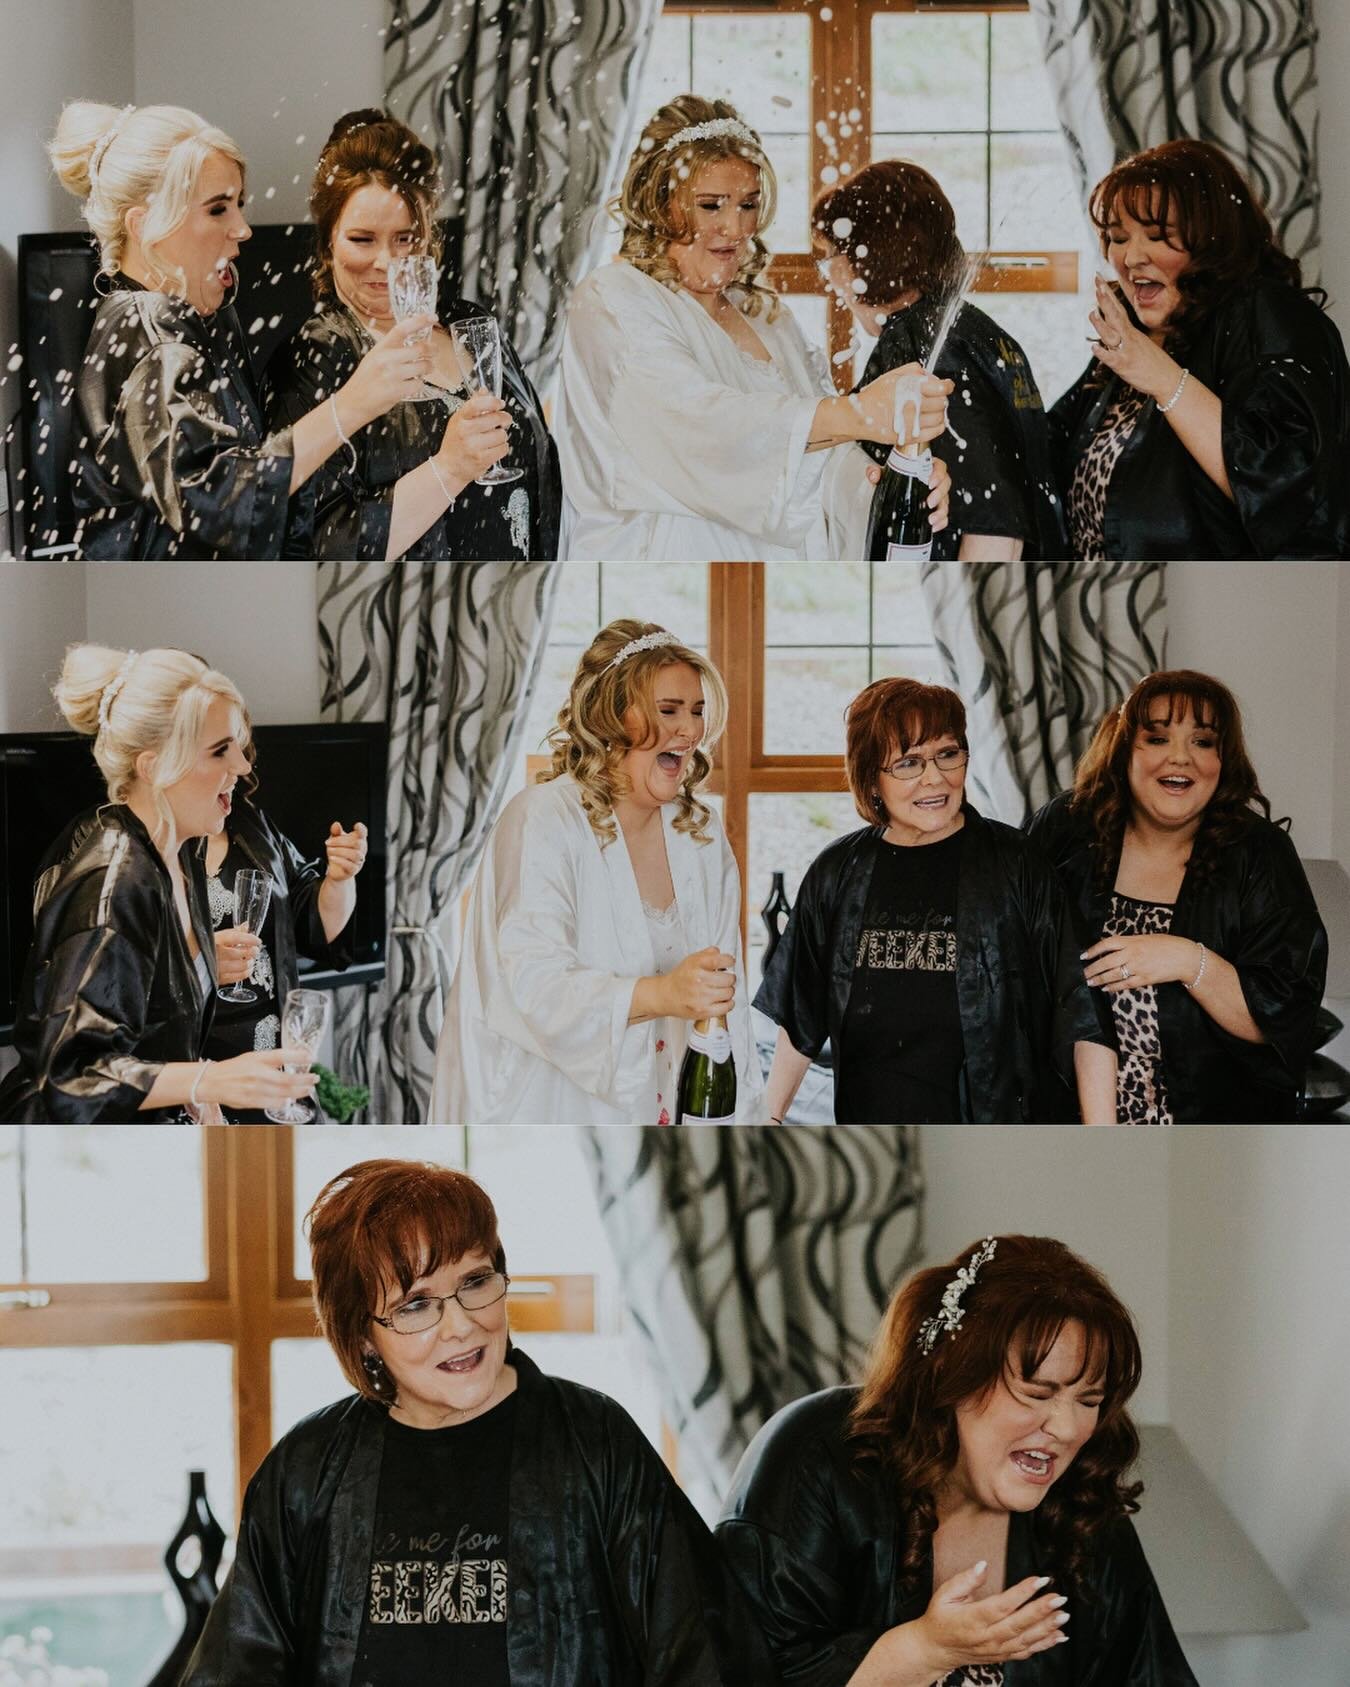 I thought I&rsquo;d seen it all at weddings but never seen anything like it in all my wedding career to date! Exploding champagne blast to the the brides mums face, just after having her makeup &amp; hair finished 😬 but at least they laughed it off 